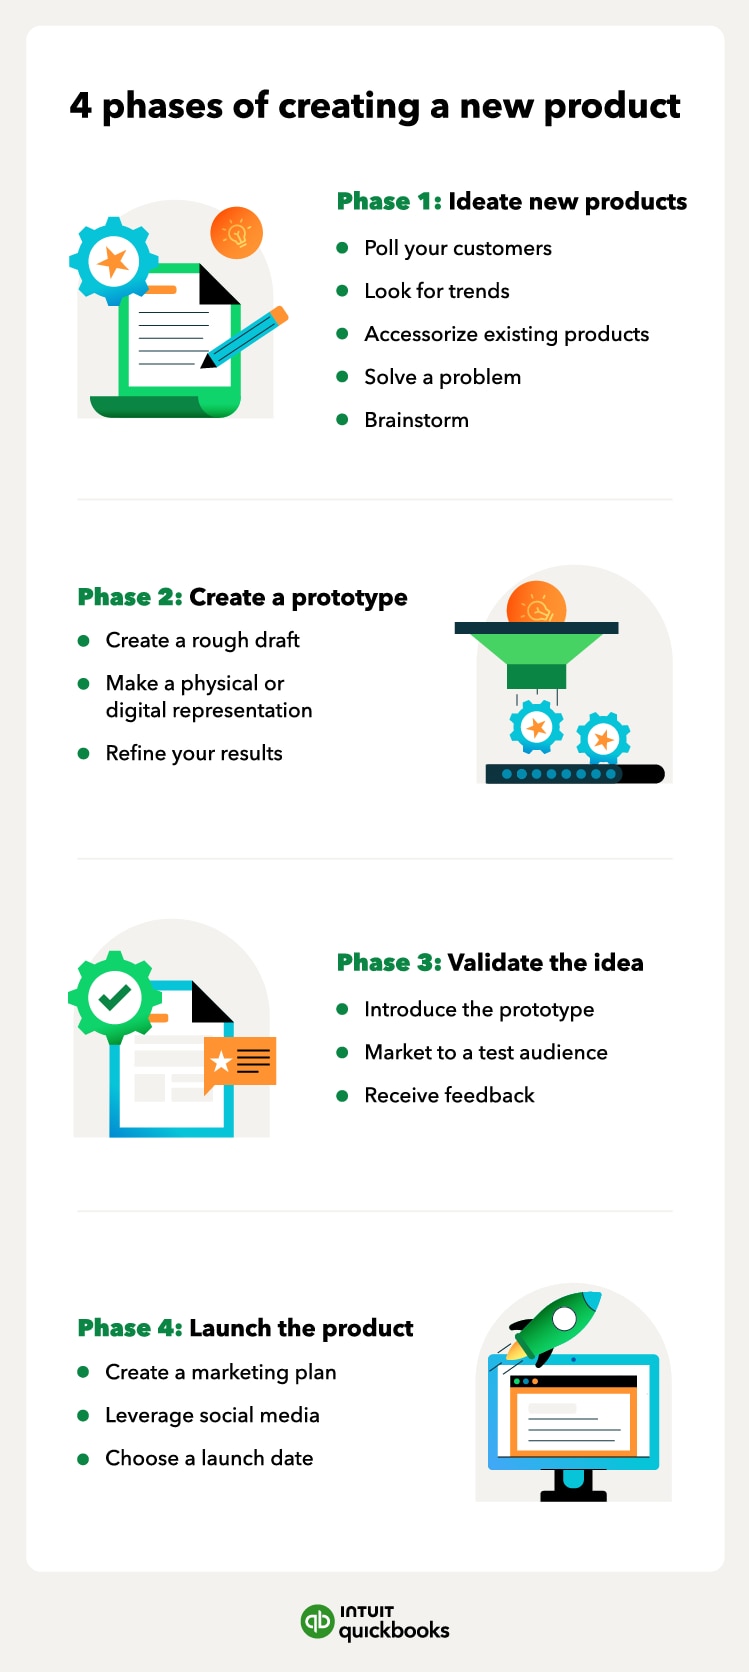 4 phases of creating new product ideas.